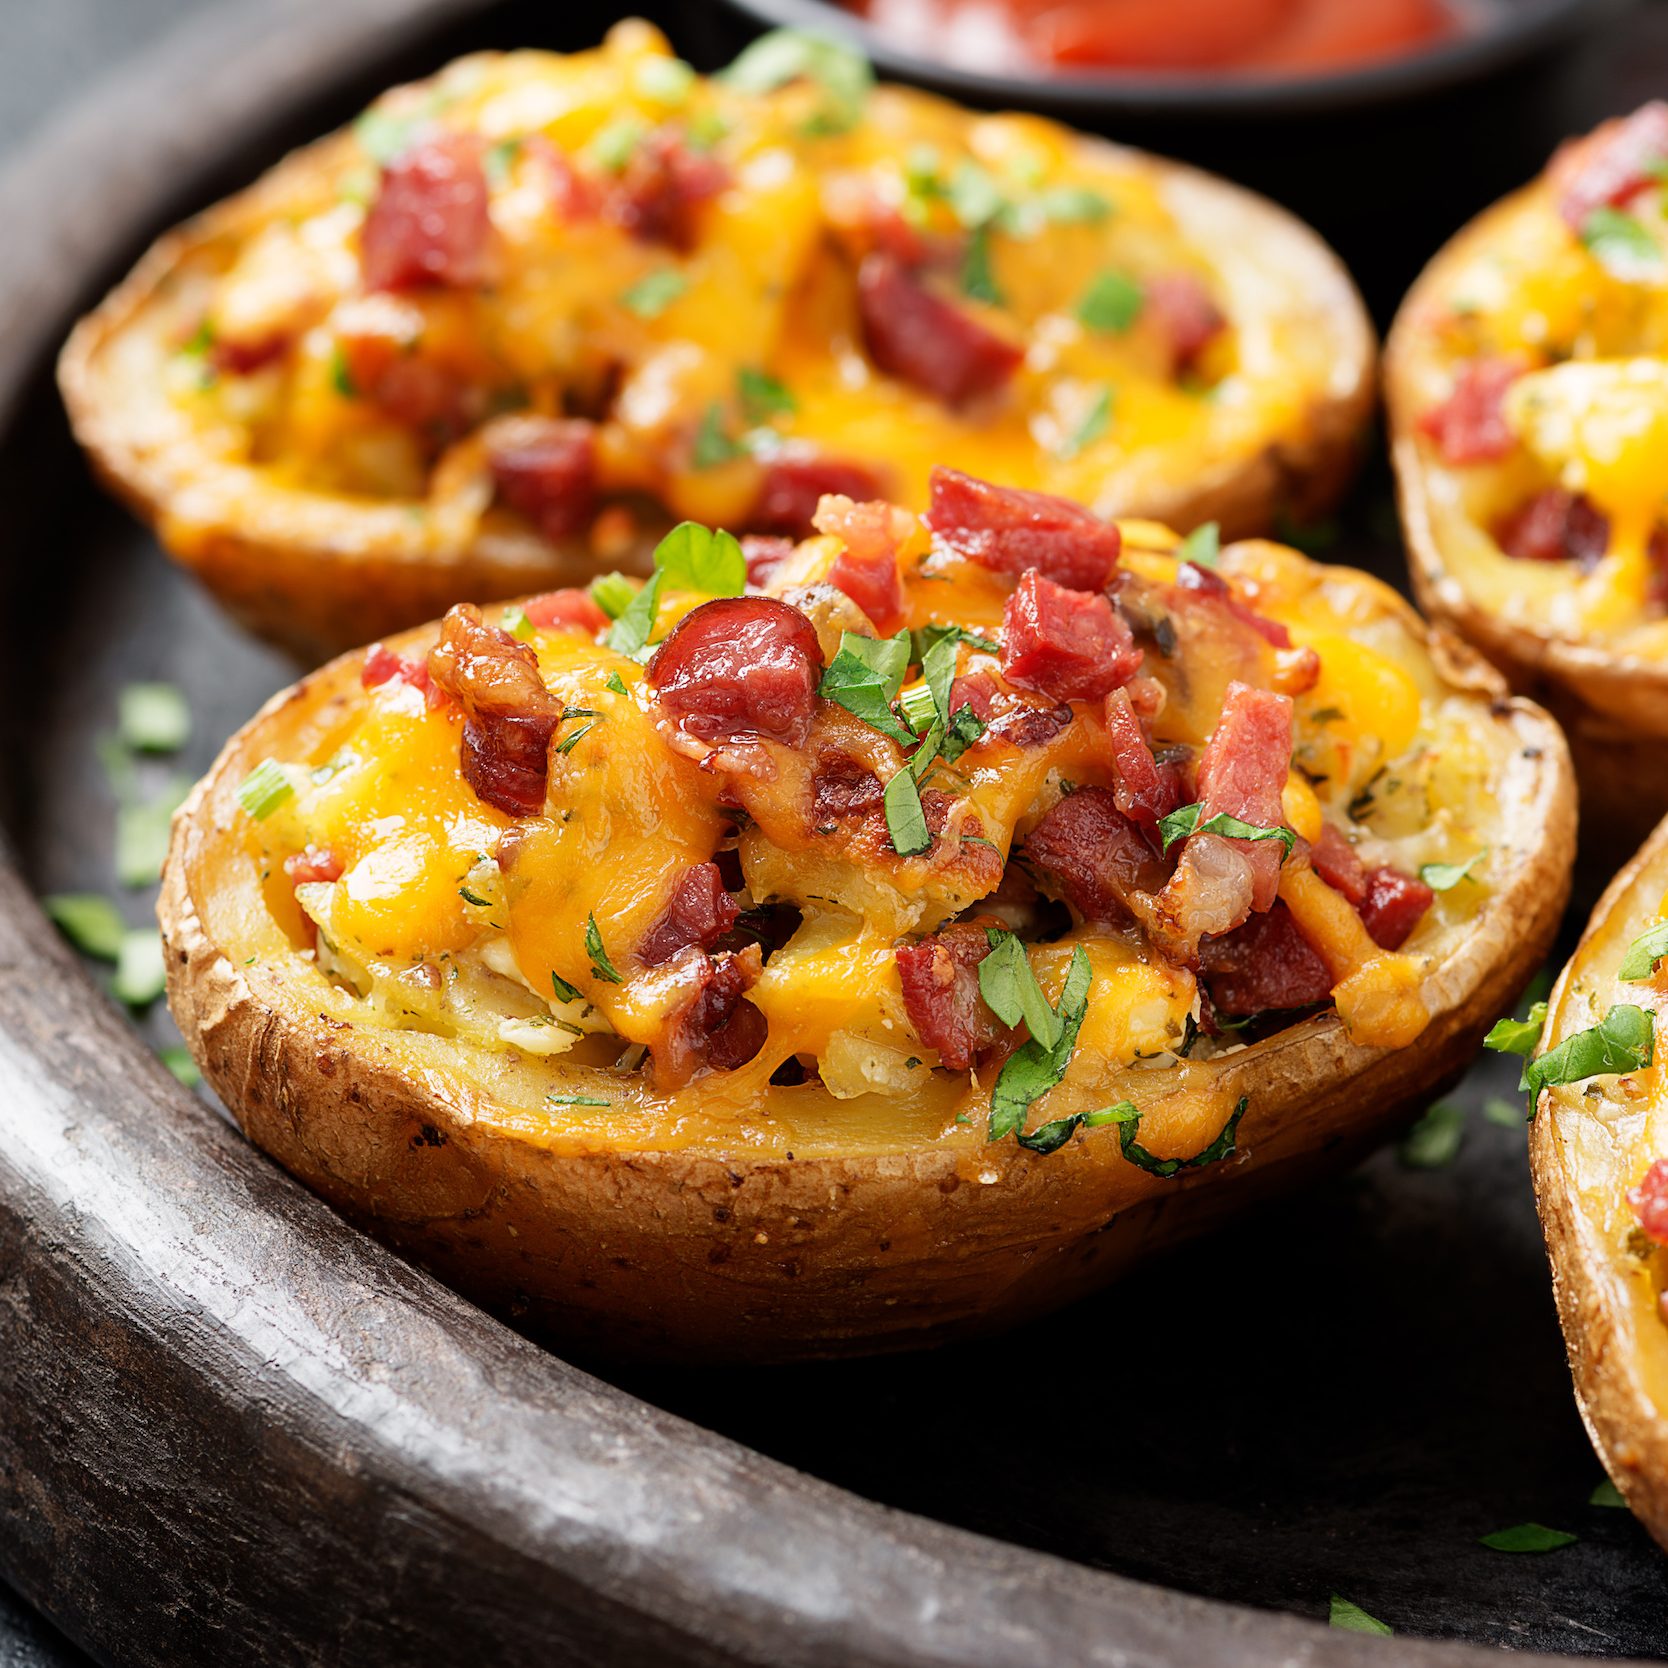 Toaster Oven Stuffed Baked Potato With Cheese and Bacon ...